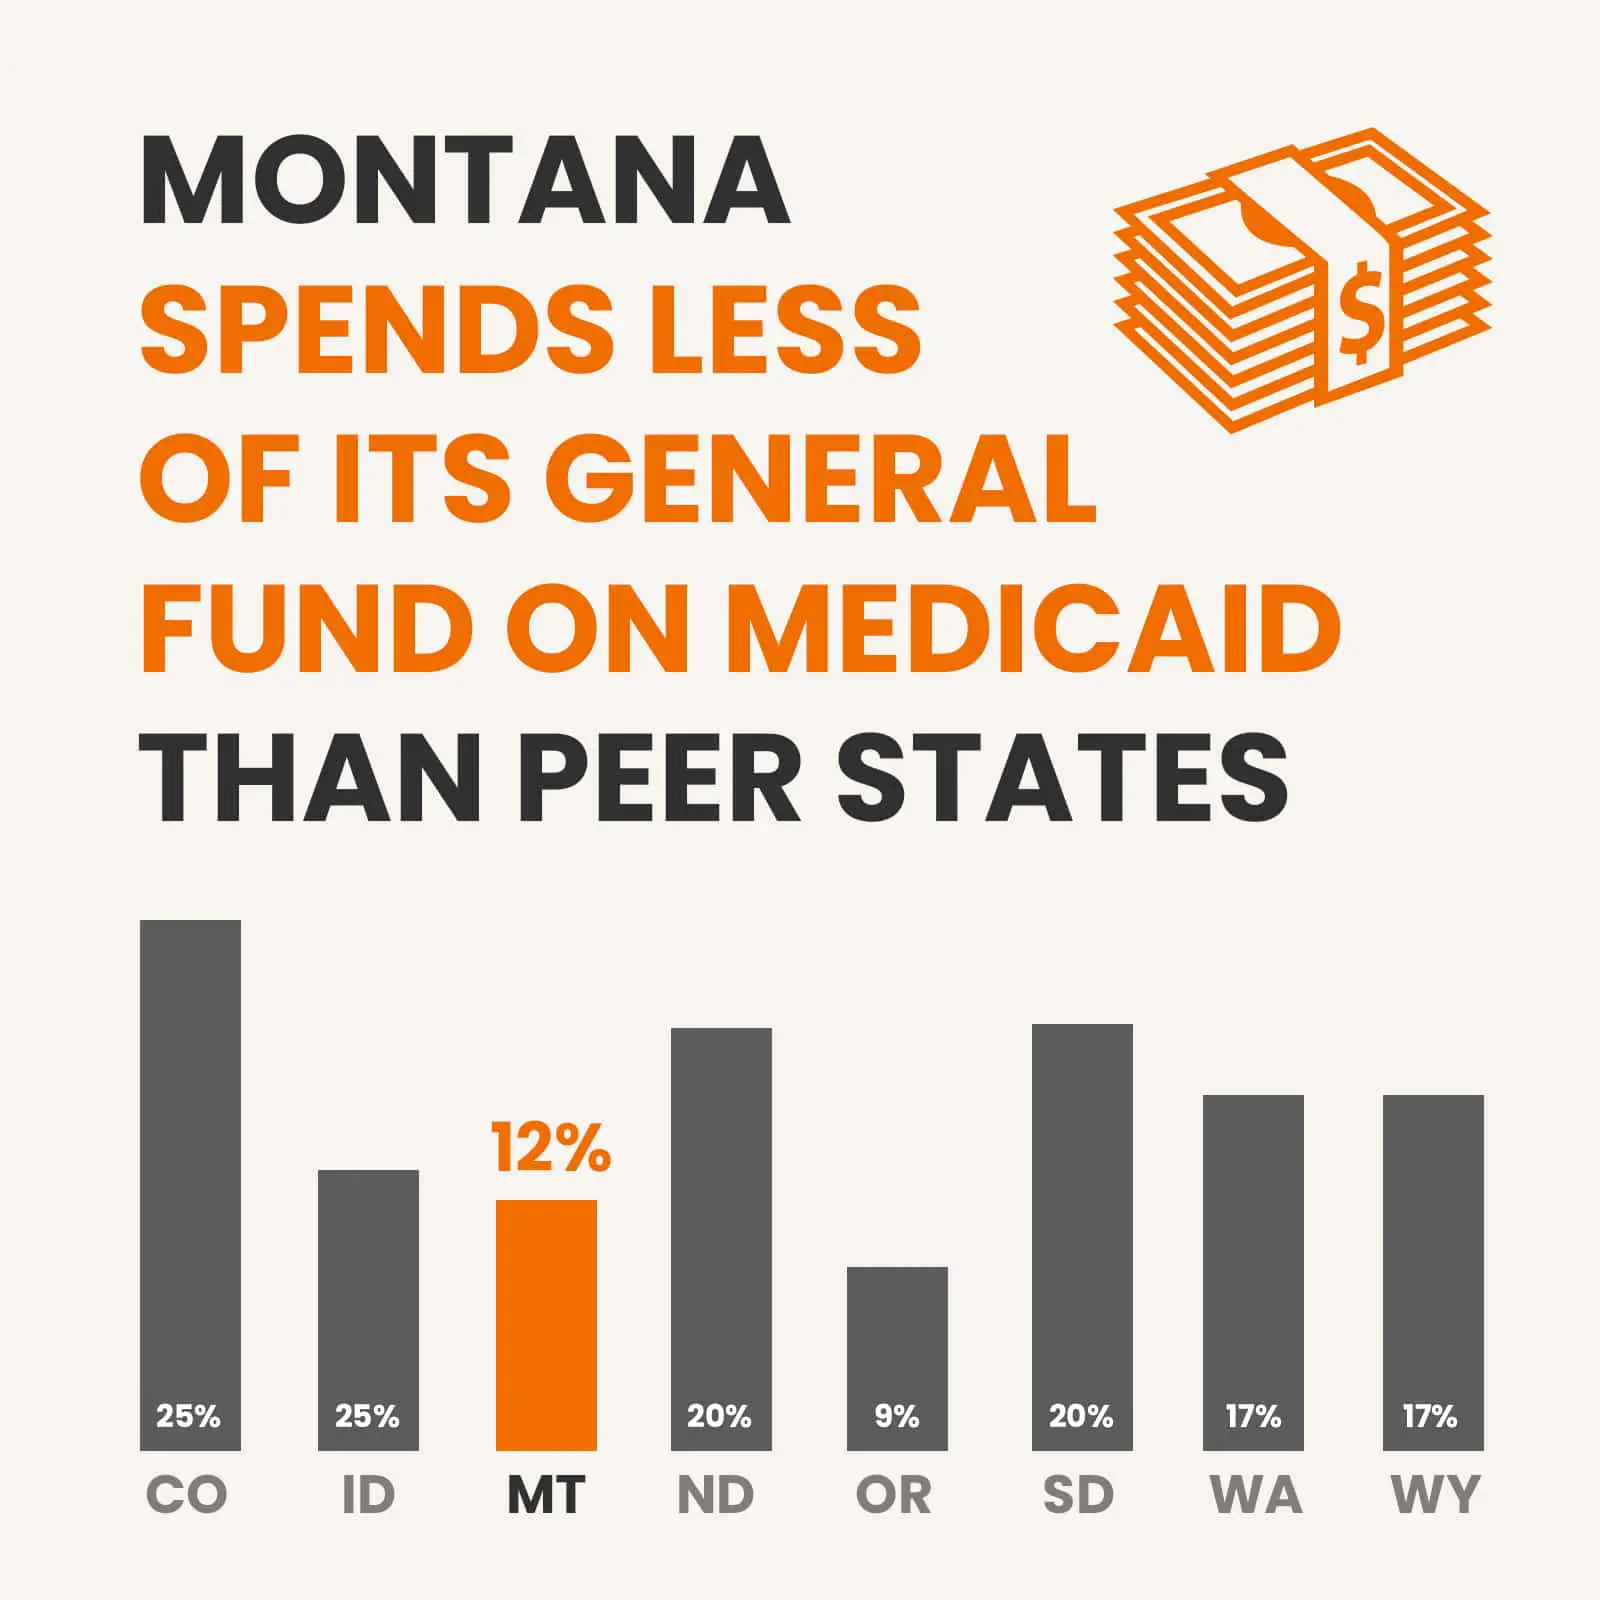 Medicaid in Montana: Release Toolkit